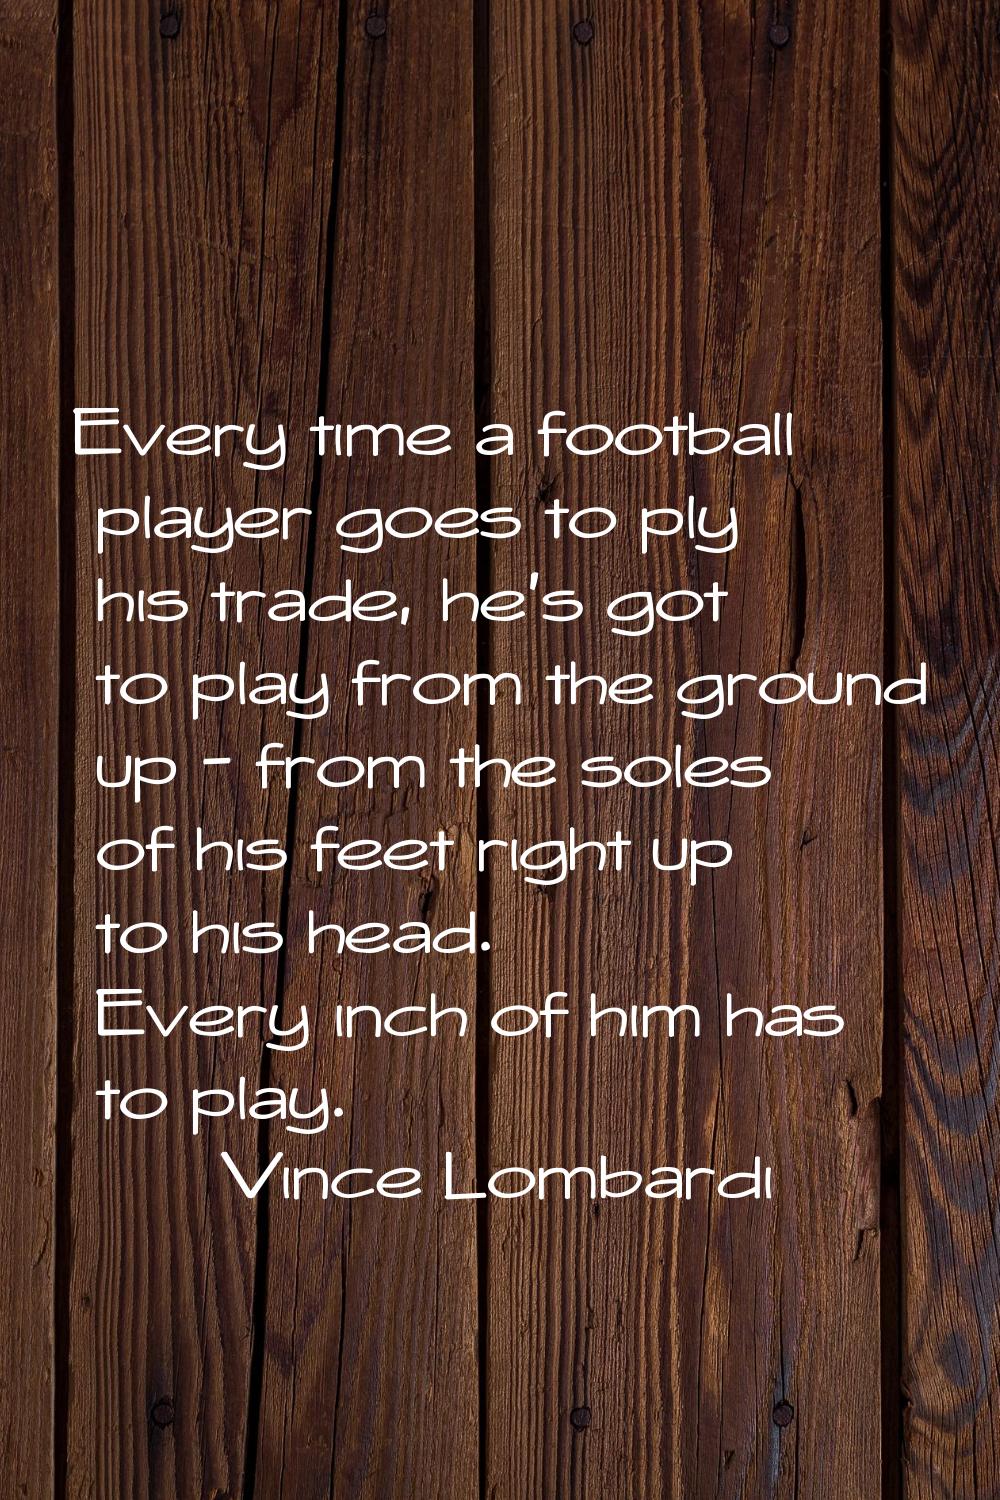 Every time a football player goes to ply his trade, he's got to play from the ground up - from the 